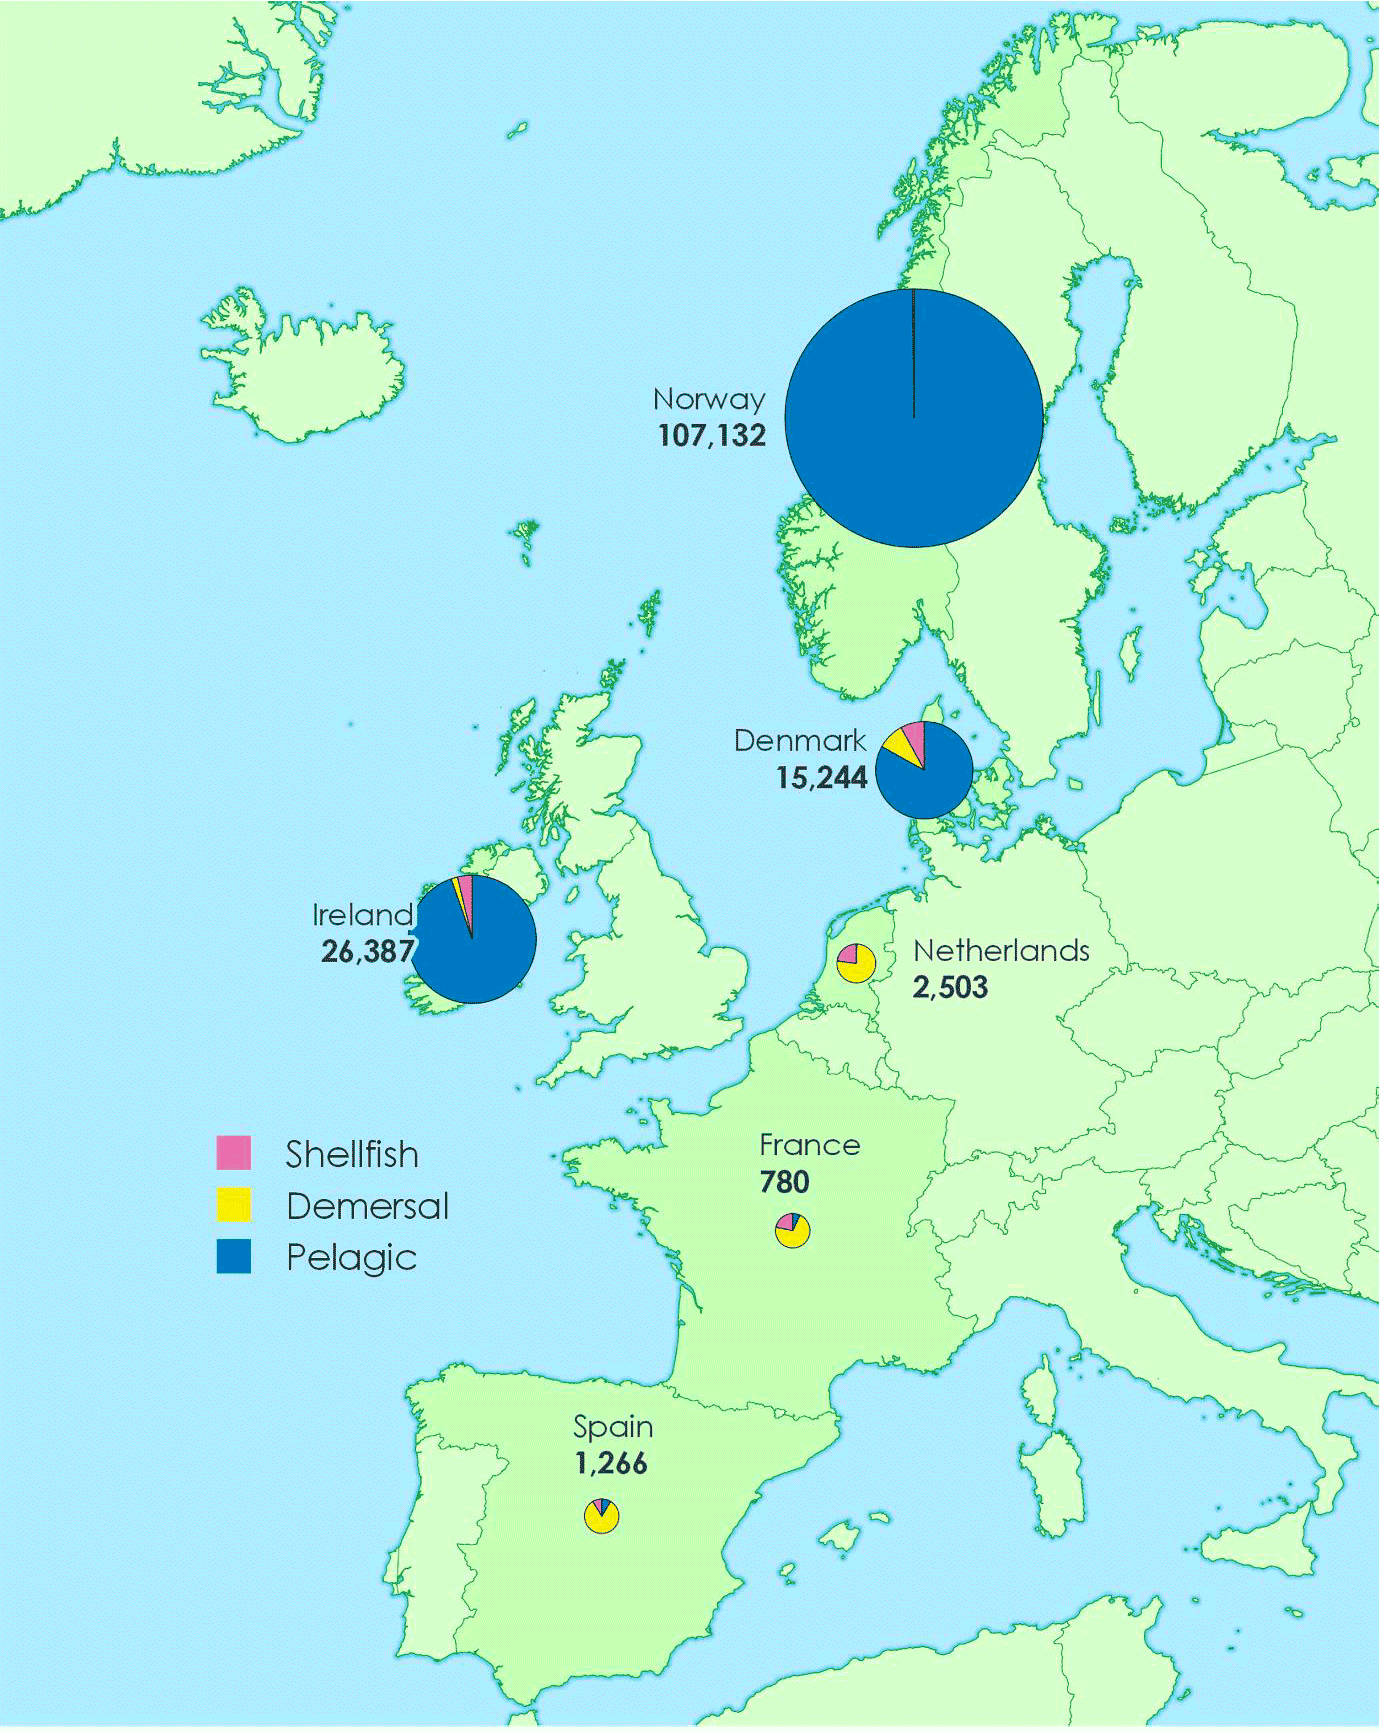 Tonnage landed abroad by Scottish vessels by country of landing and species type in 2020